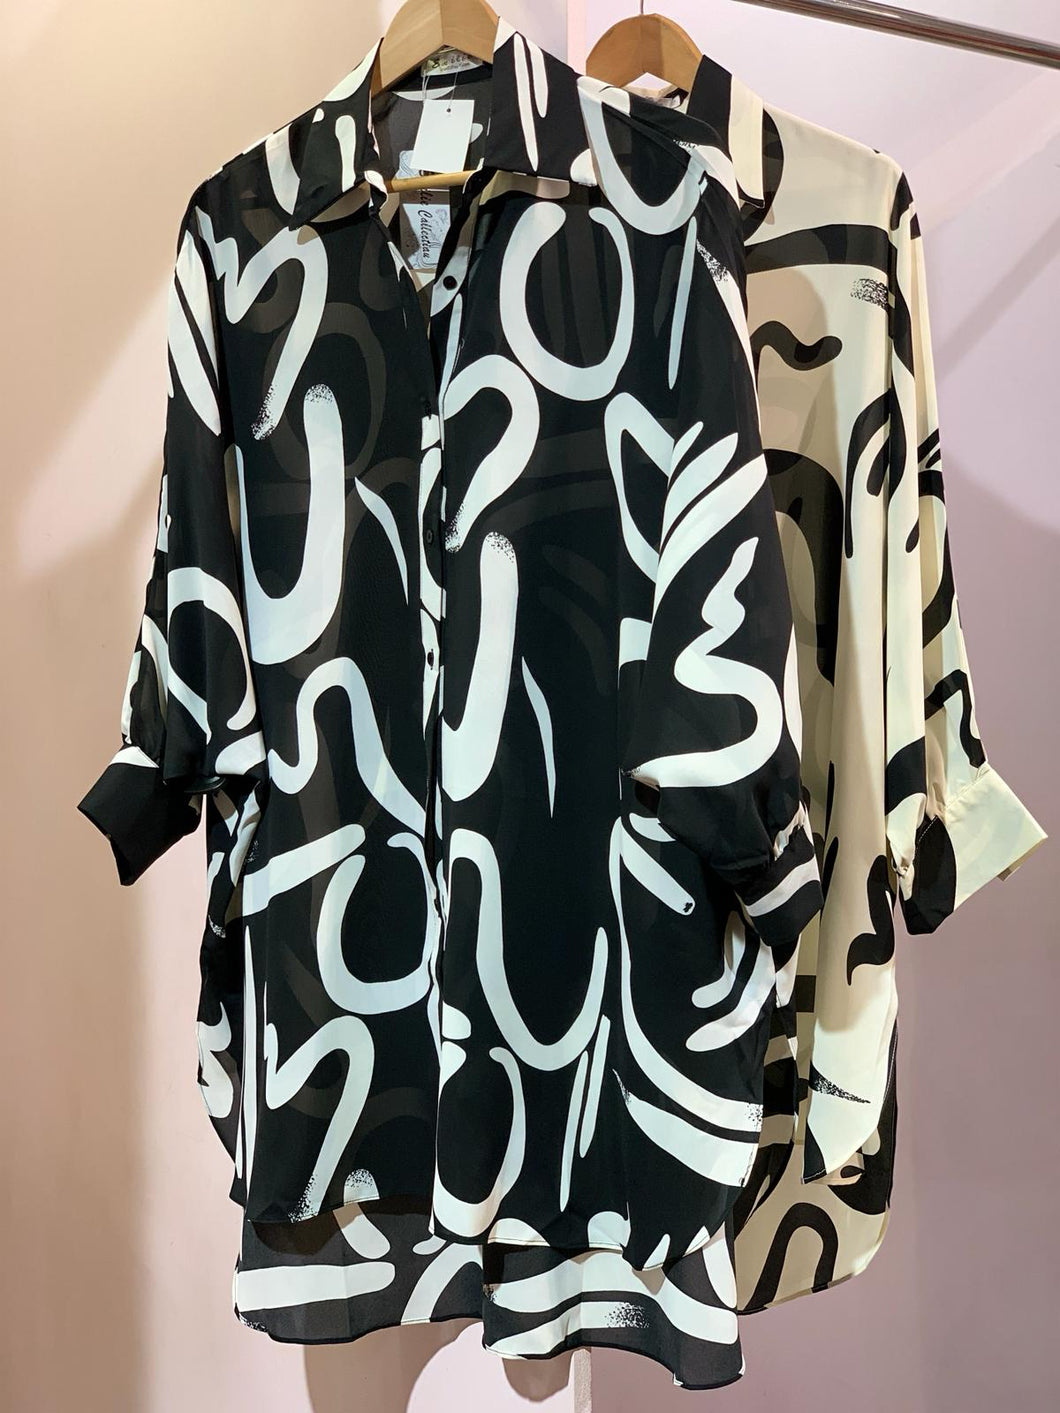 Abstract Tunic